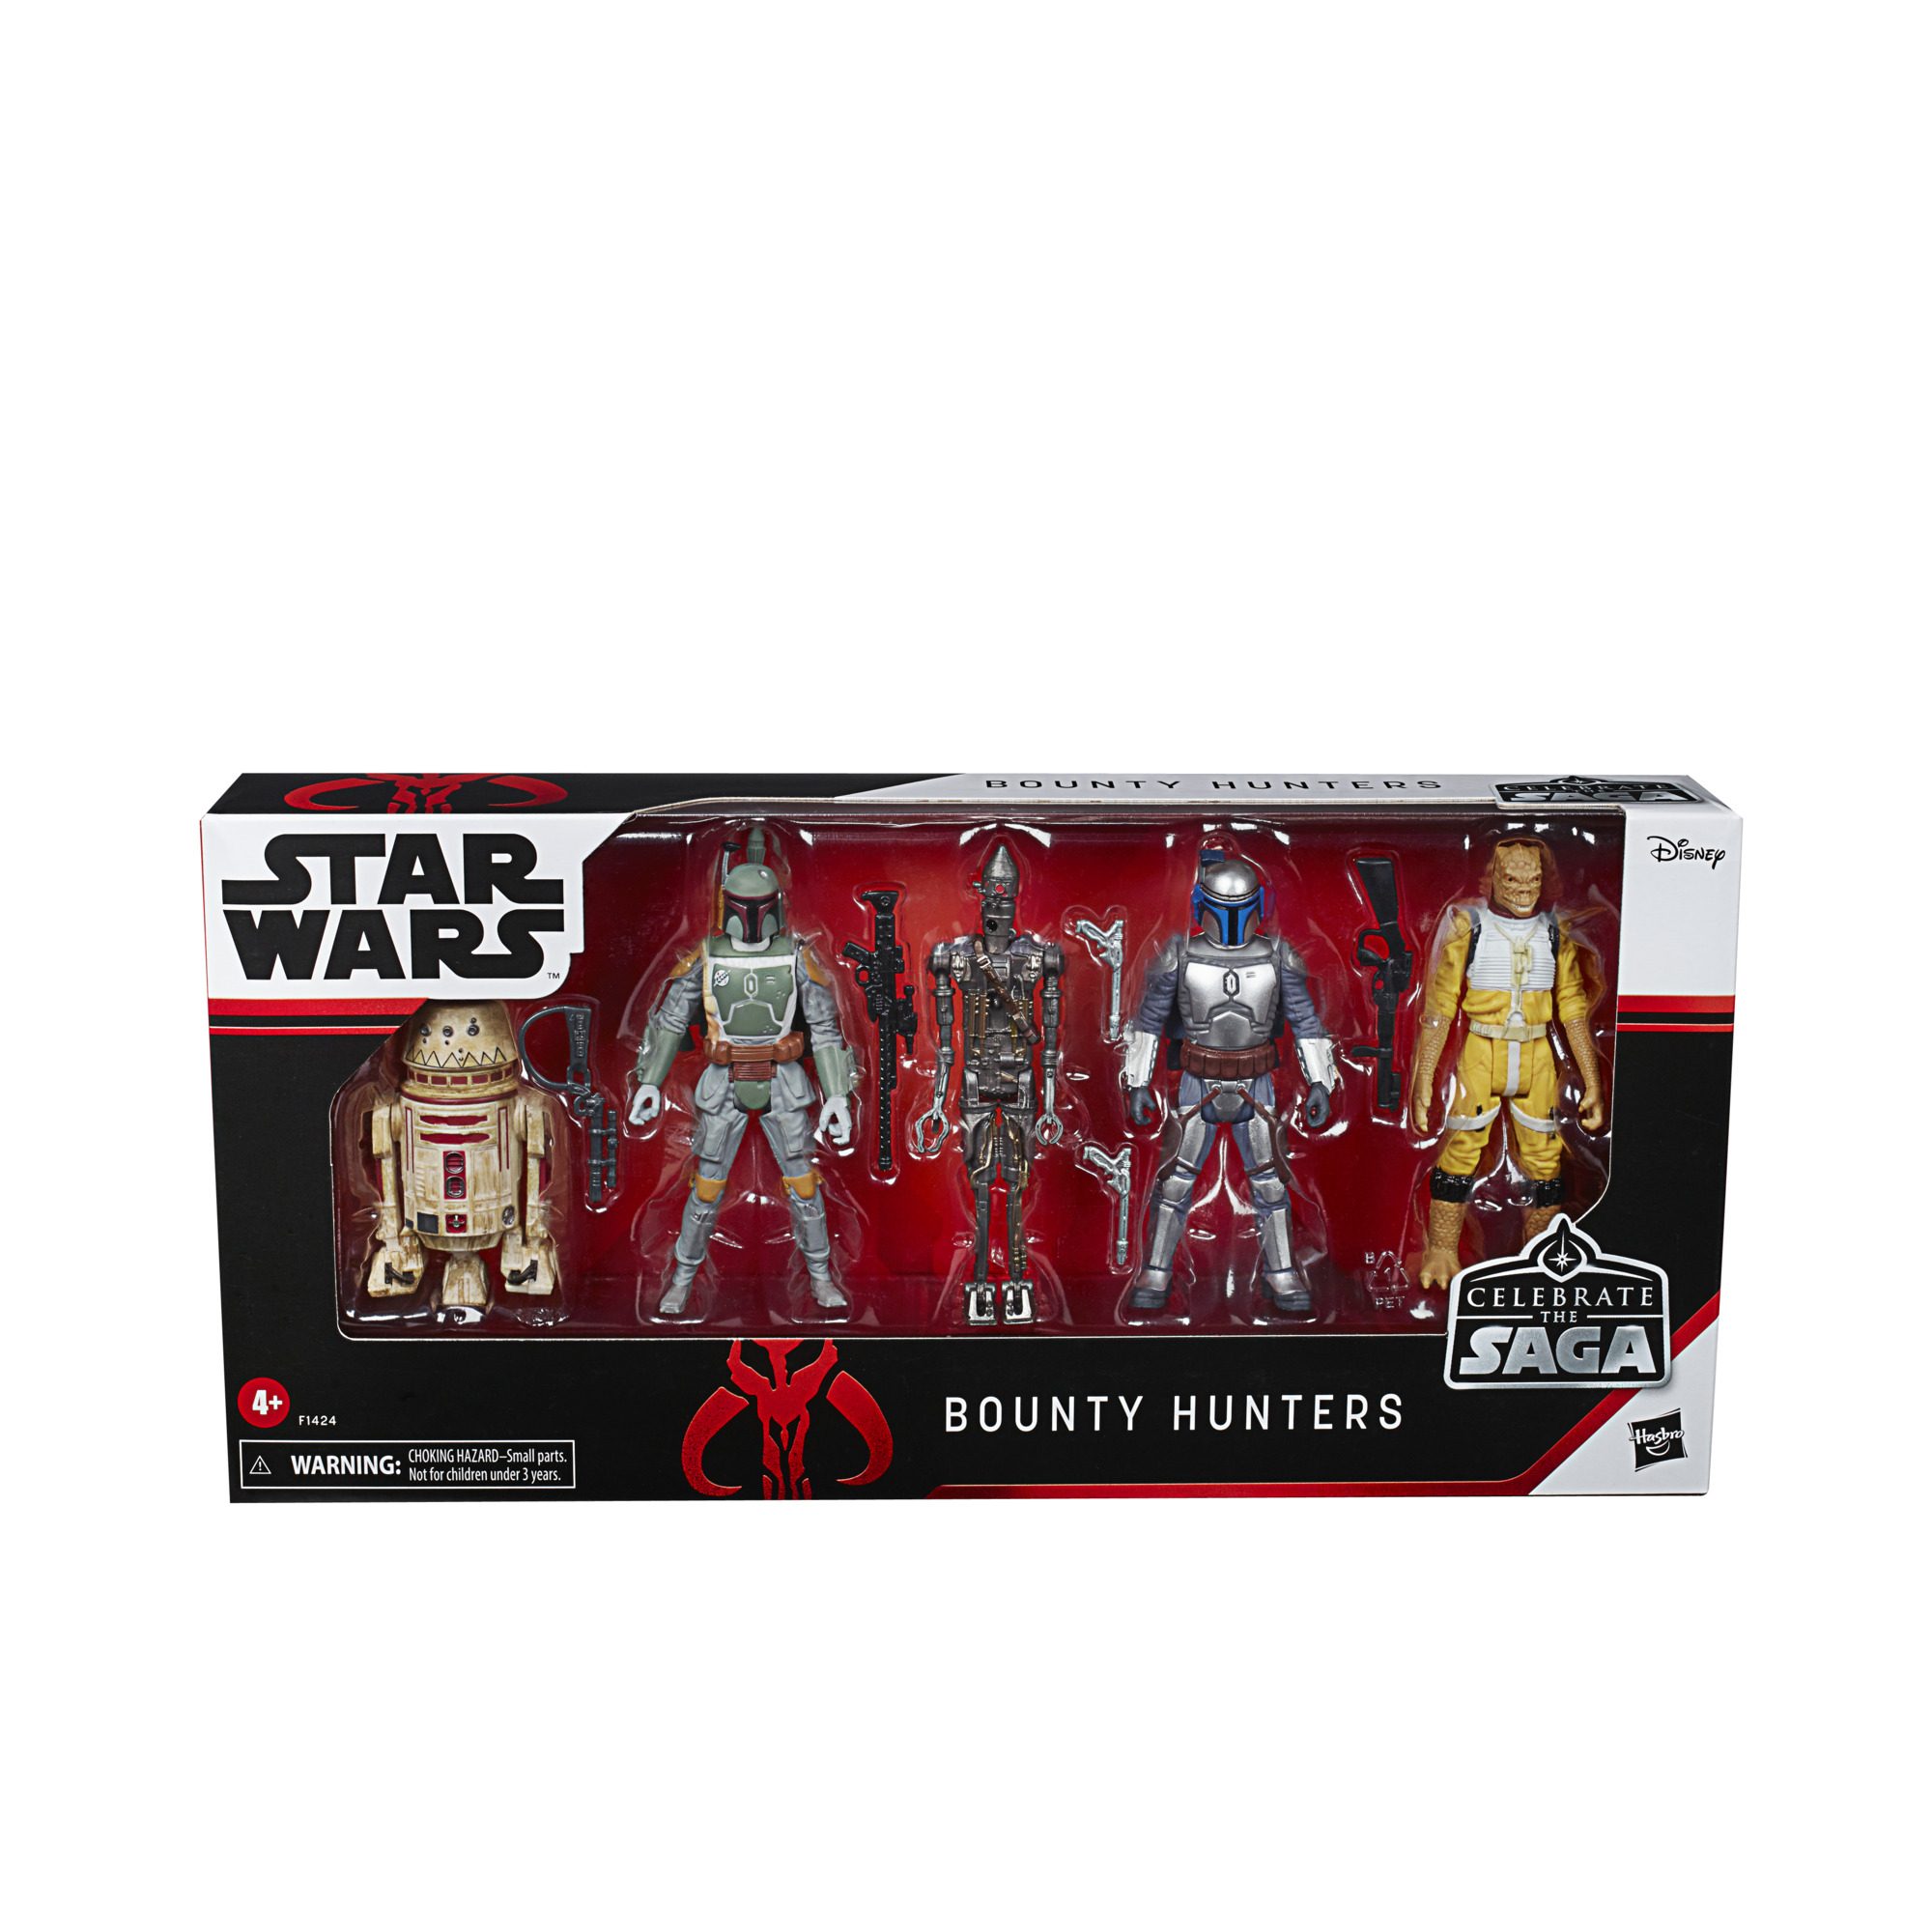 Star Wars Celebrate the Saga Toys Bounty Hunters Action Figure Set, Accessories - image 2 of 7